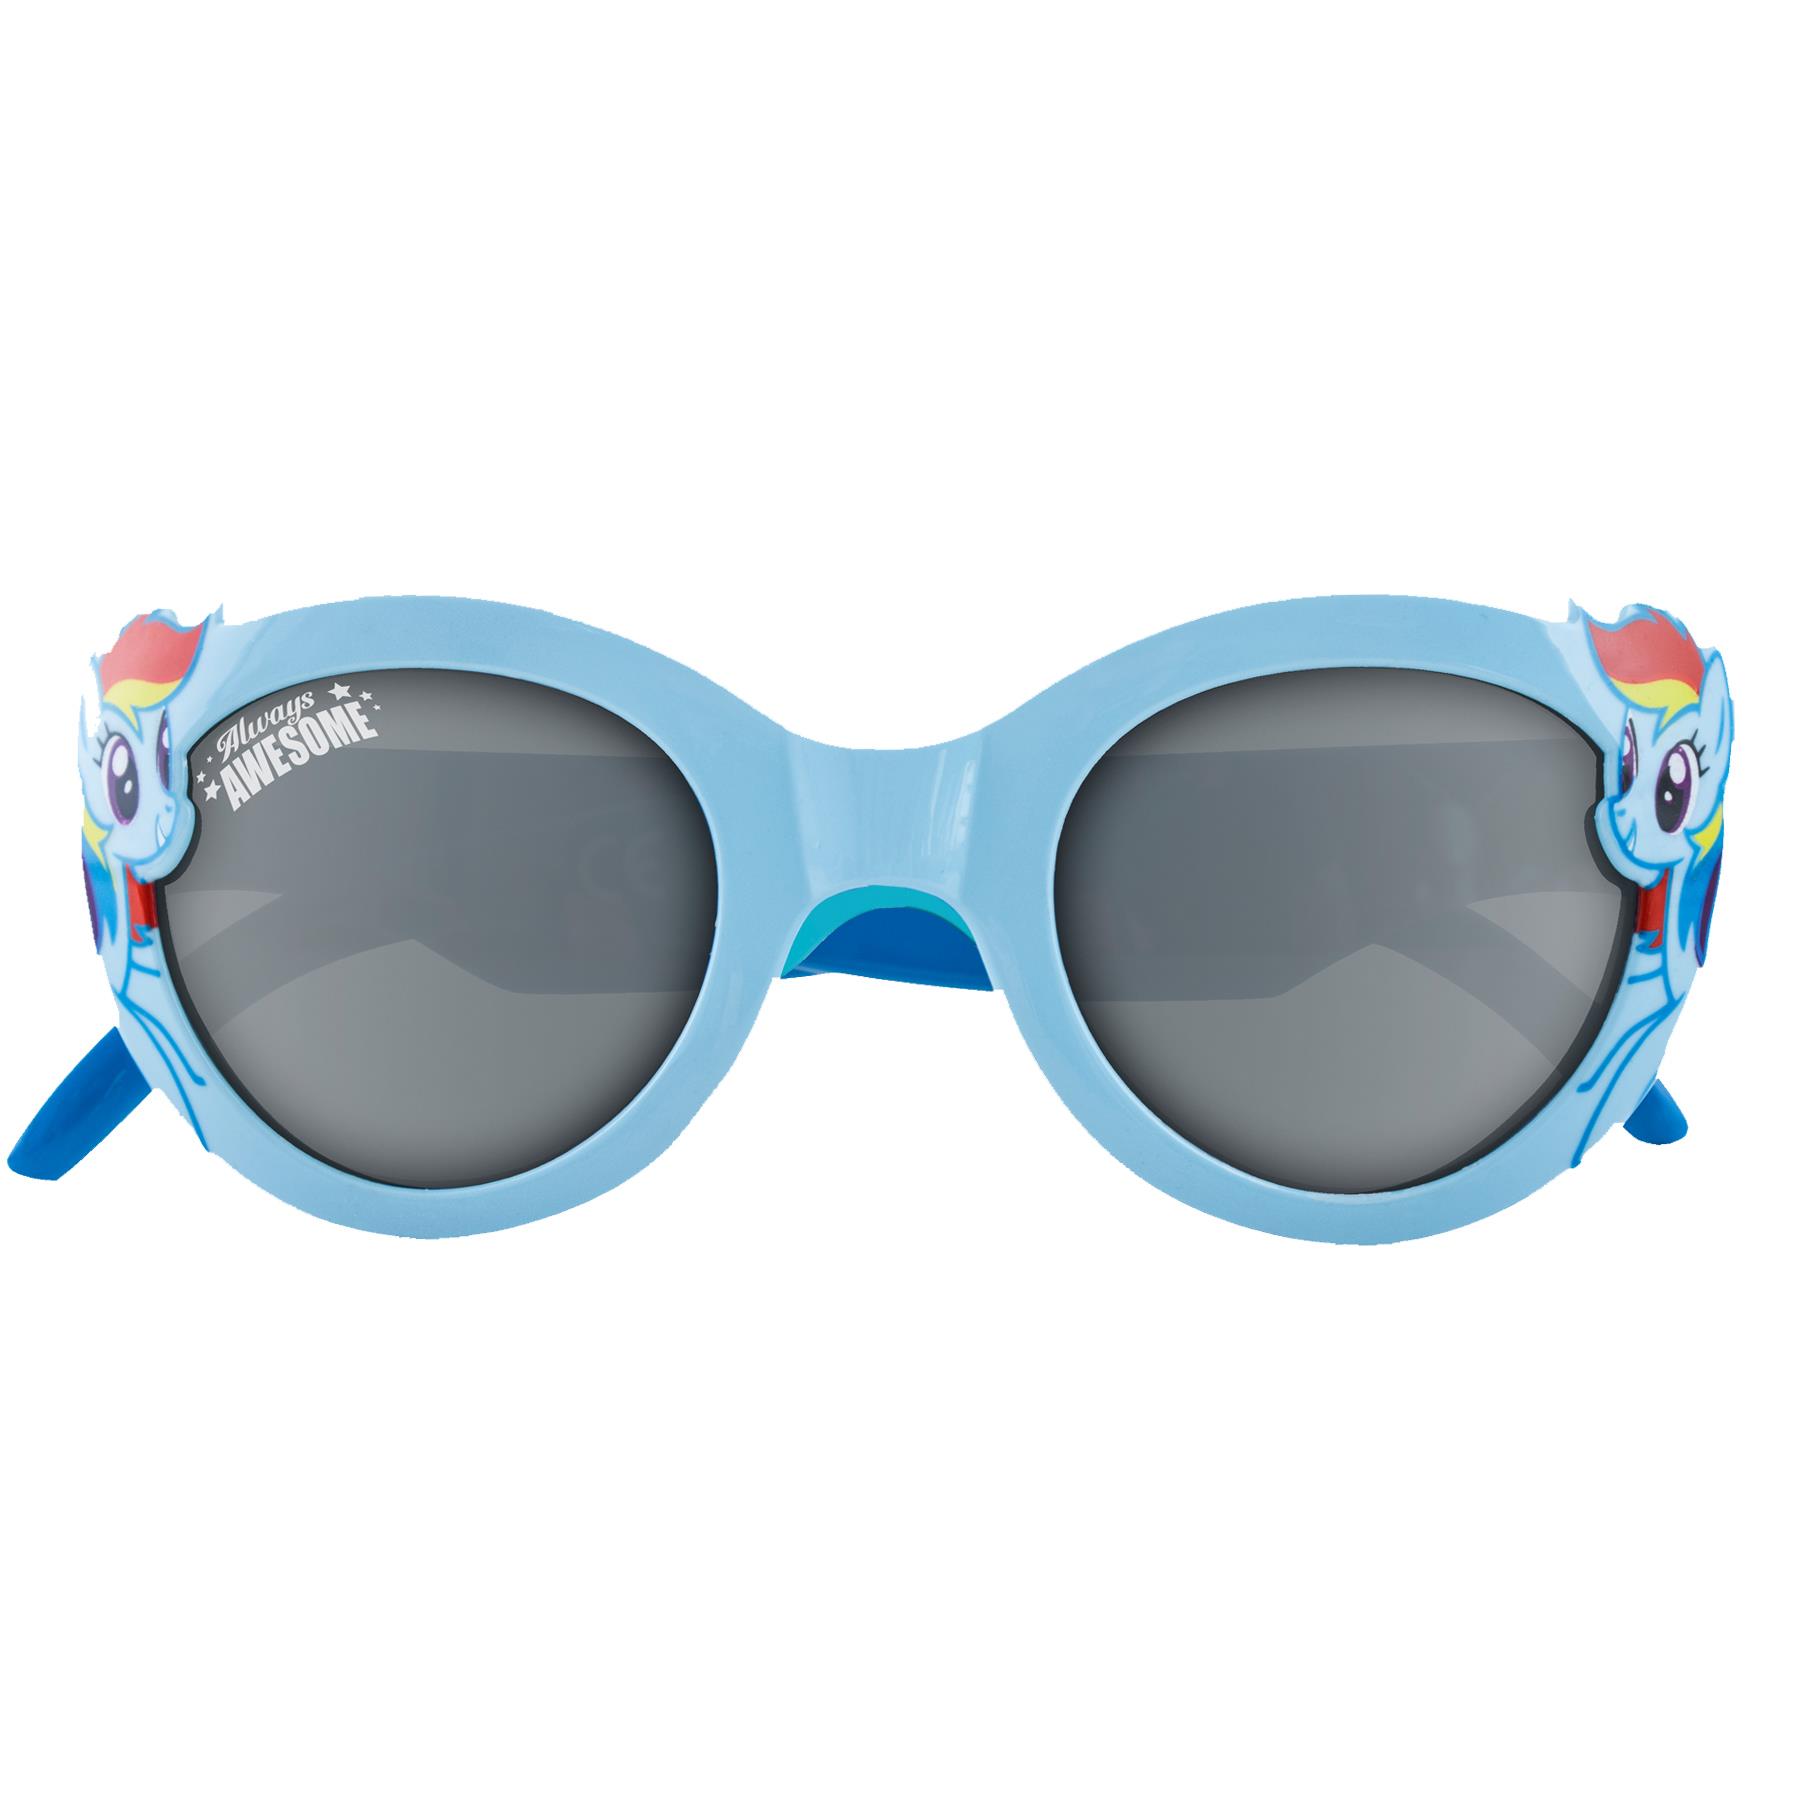 Children's TV Character Sunglasses UV protection for Holiday - My Little Pony PONY4